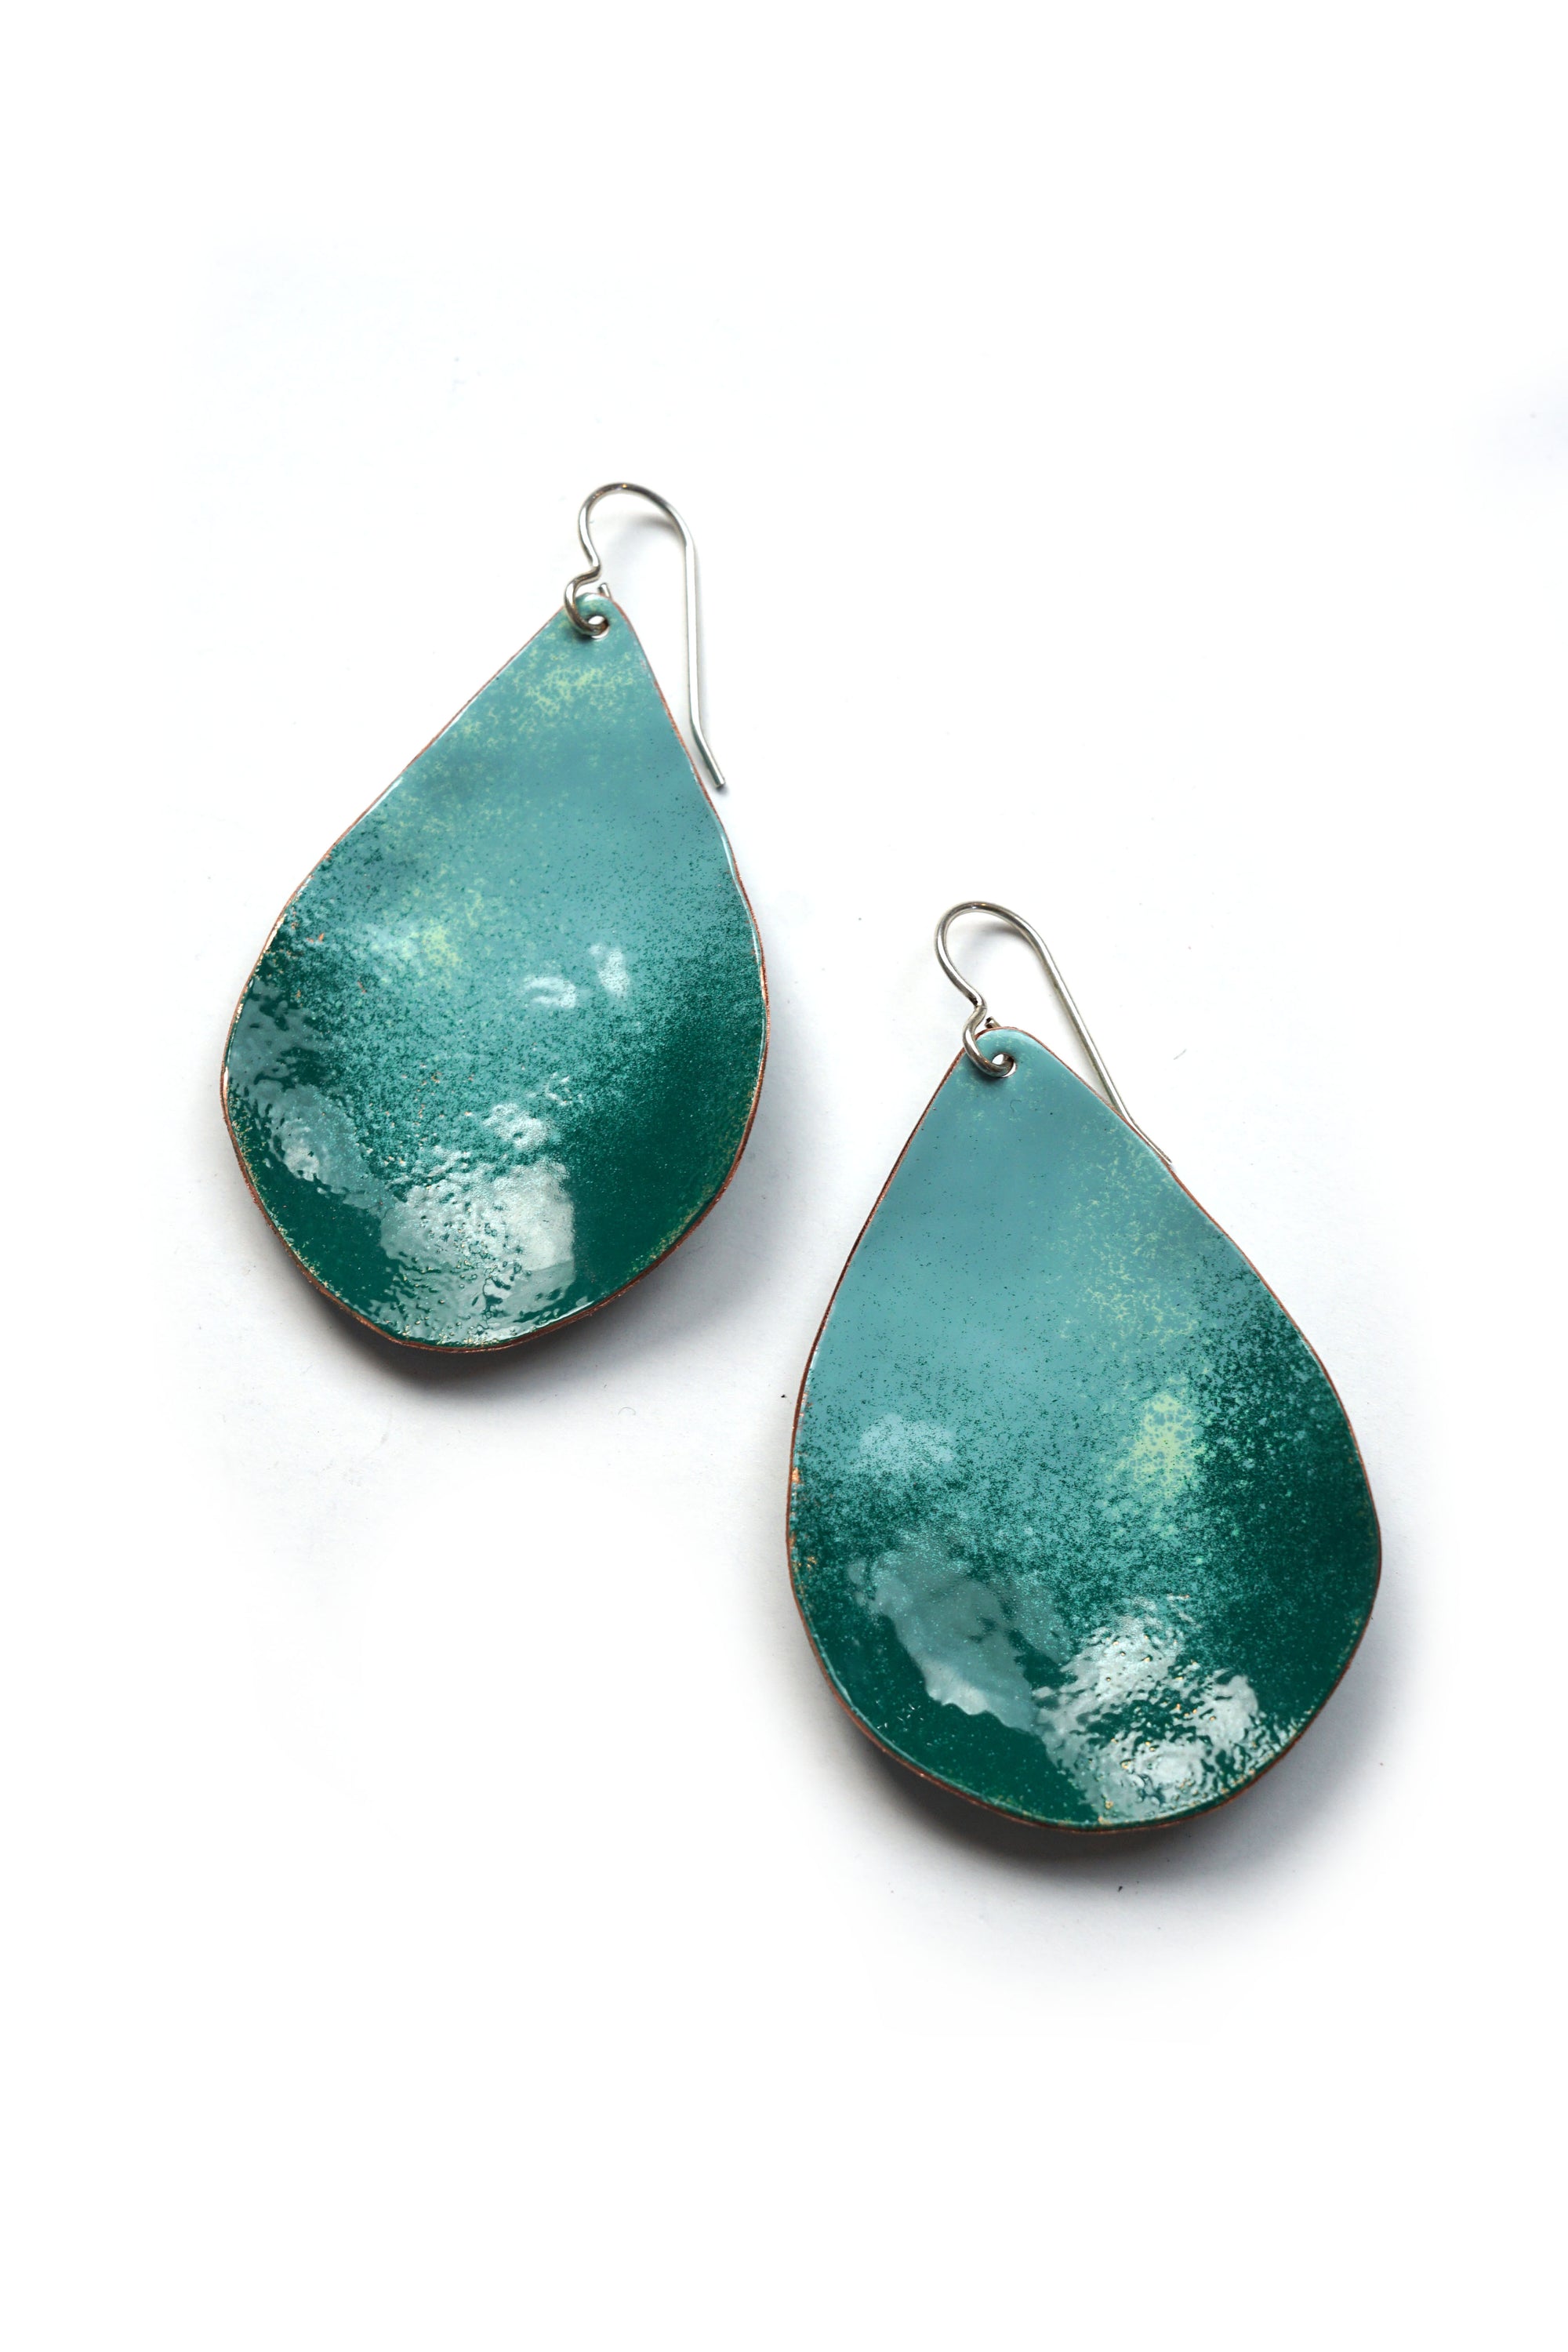 Chroma Earrings in Faded Teal and Emerald Green